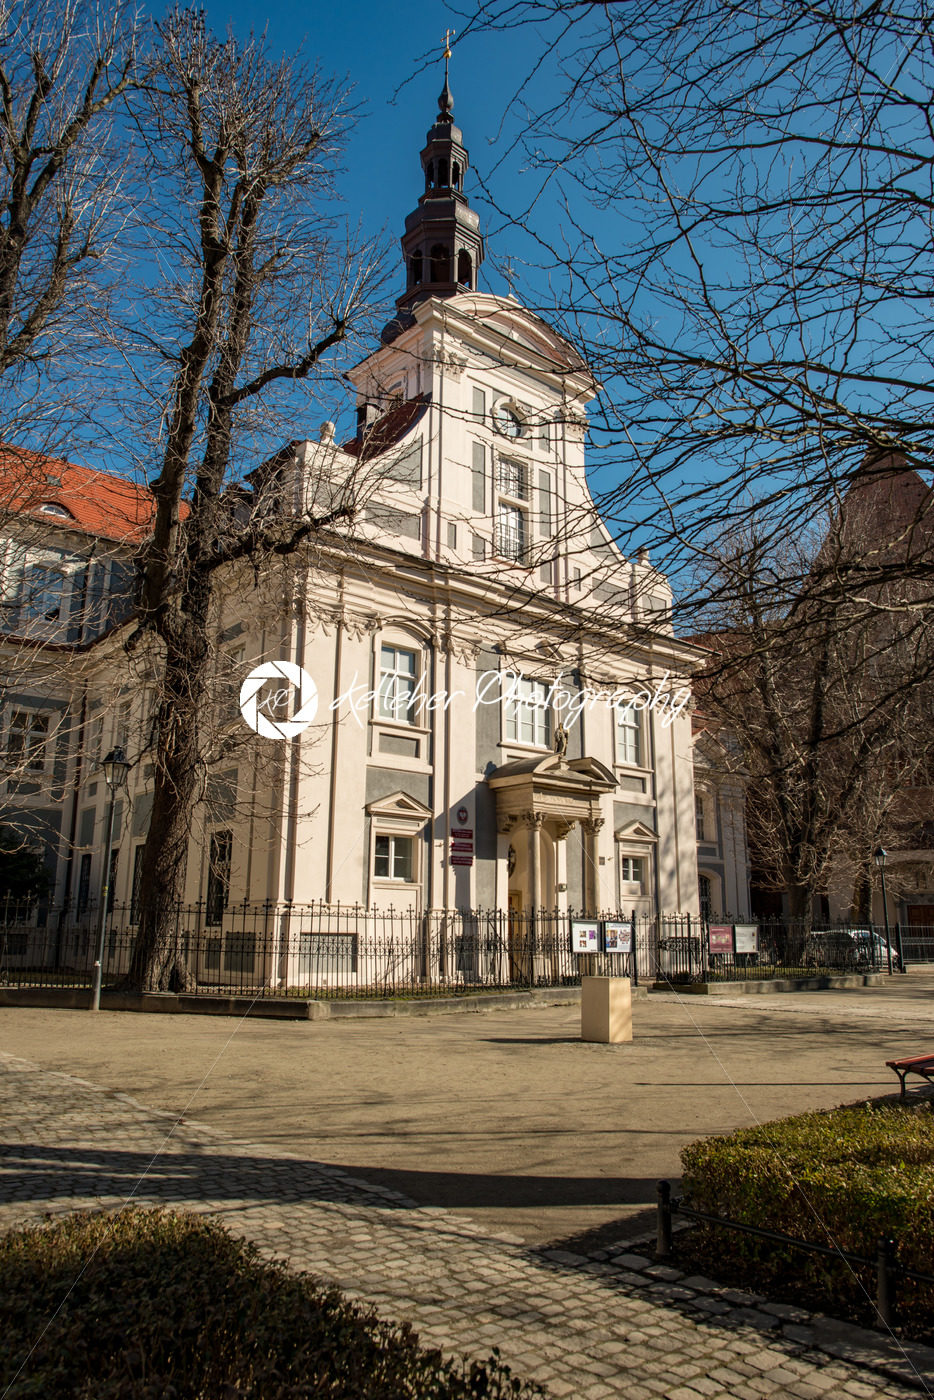 Wroclaw, Poland – March 9, 2018: Wroclaw Old Town historic area in the morning. - Kelleher Photography Store